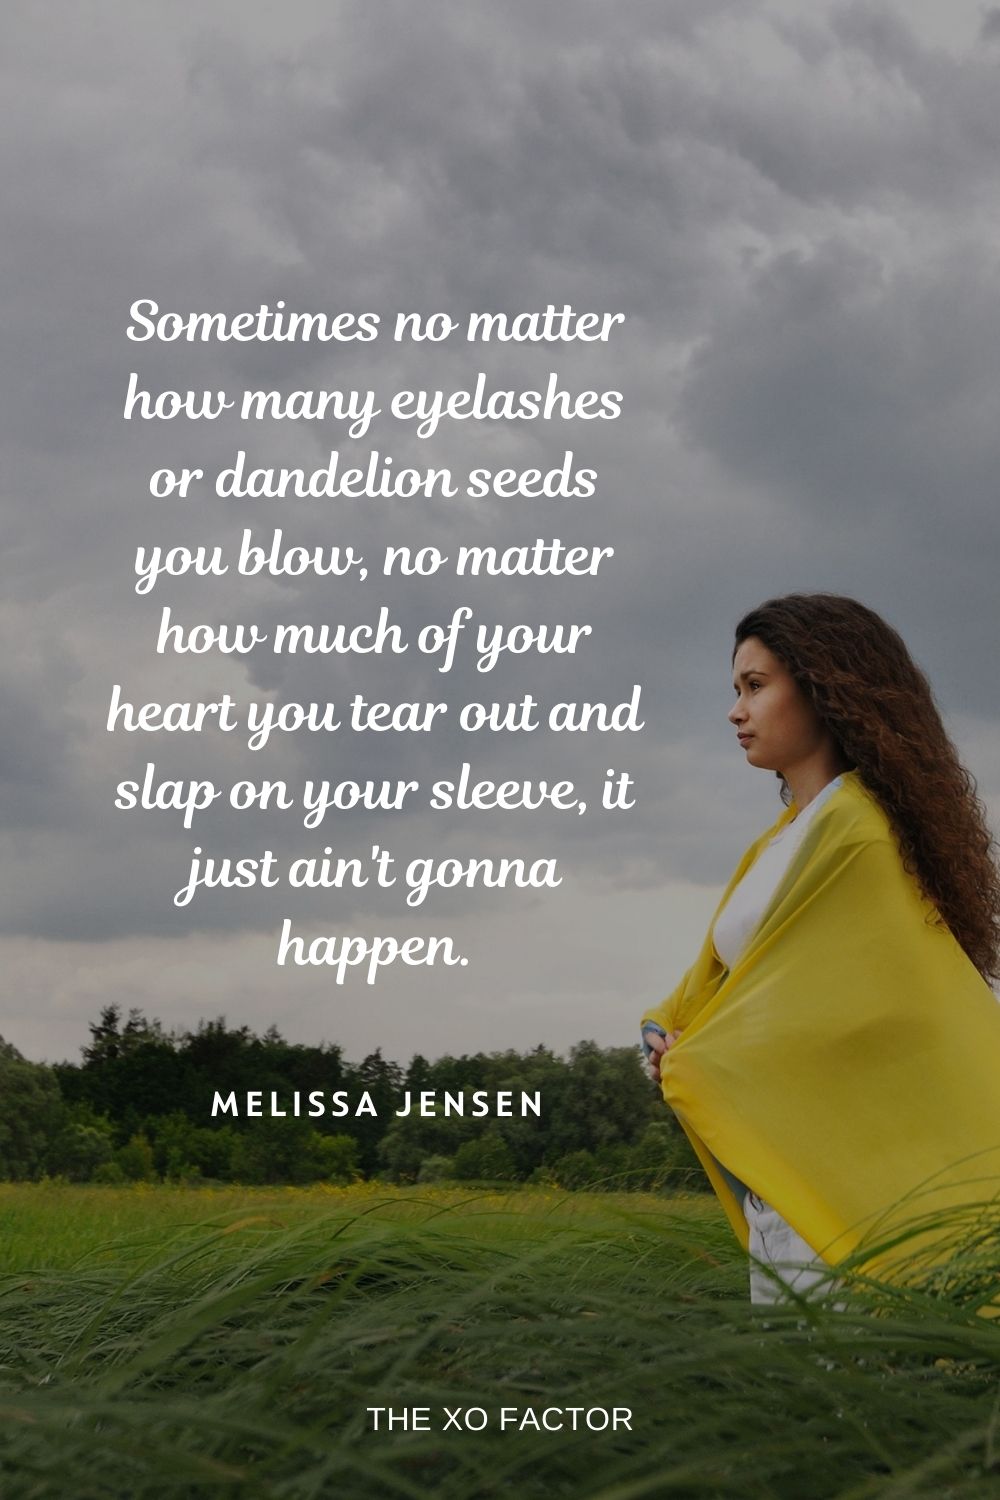 Sometimes no matter how many eyelashes or dandelion seeds you blow, no matter how much of your heart you tear out and slap on your sleeve, it just ain't gonna happen. Melissa Jensen